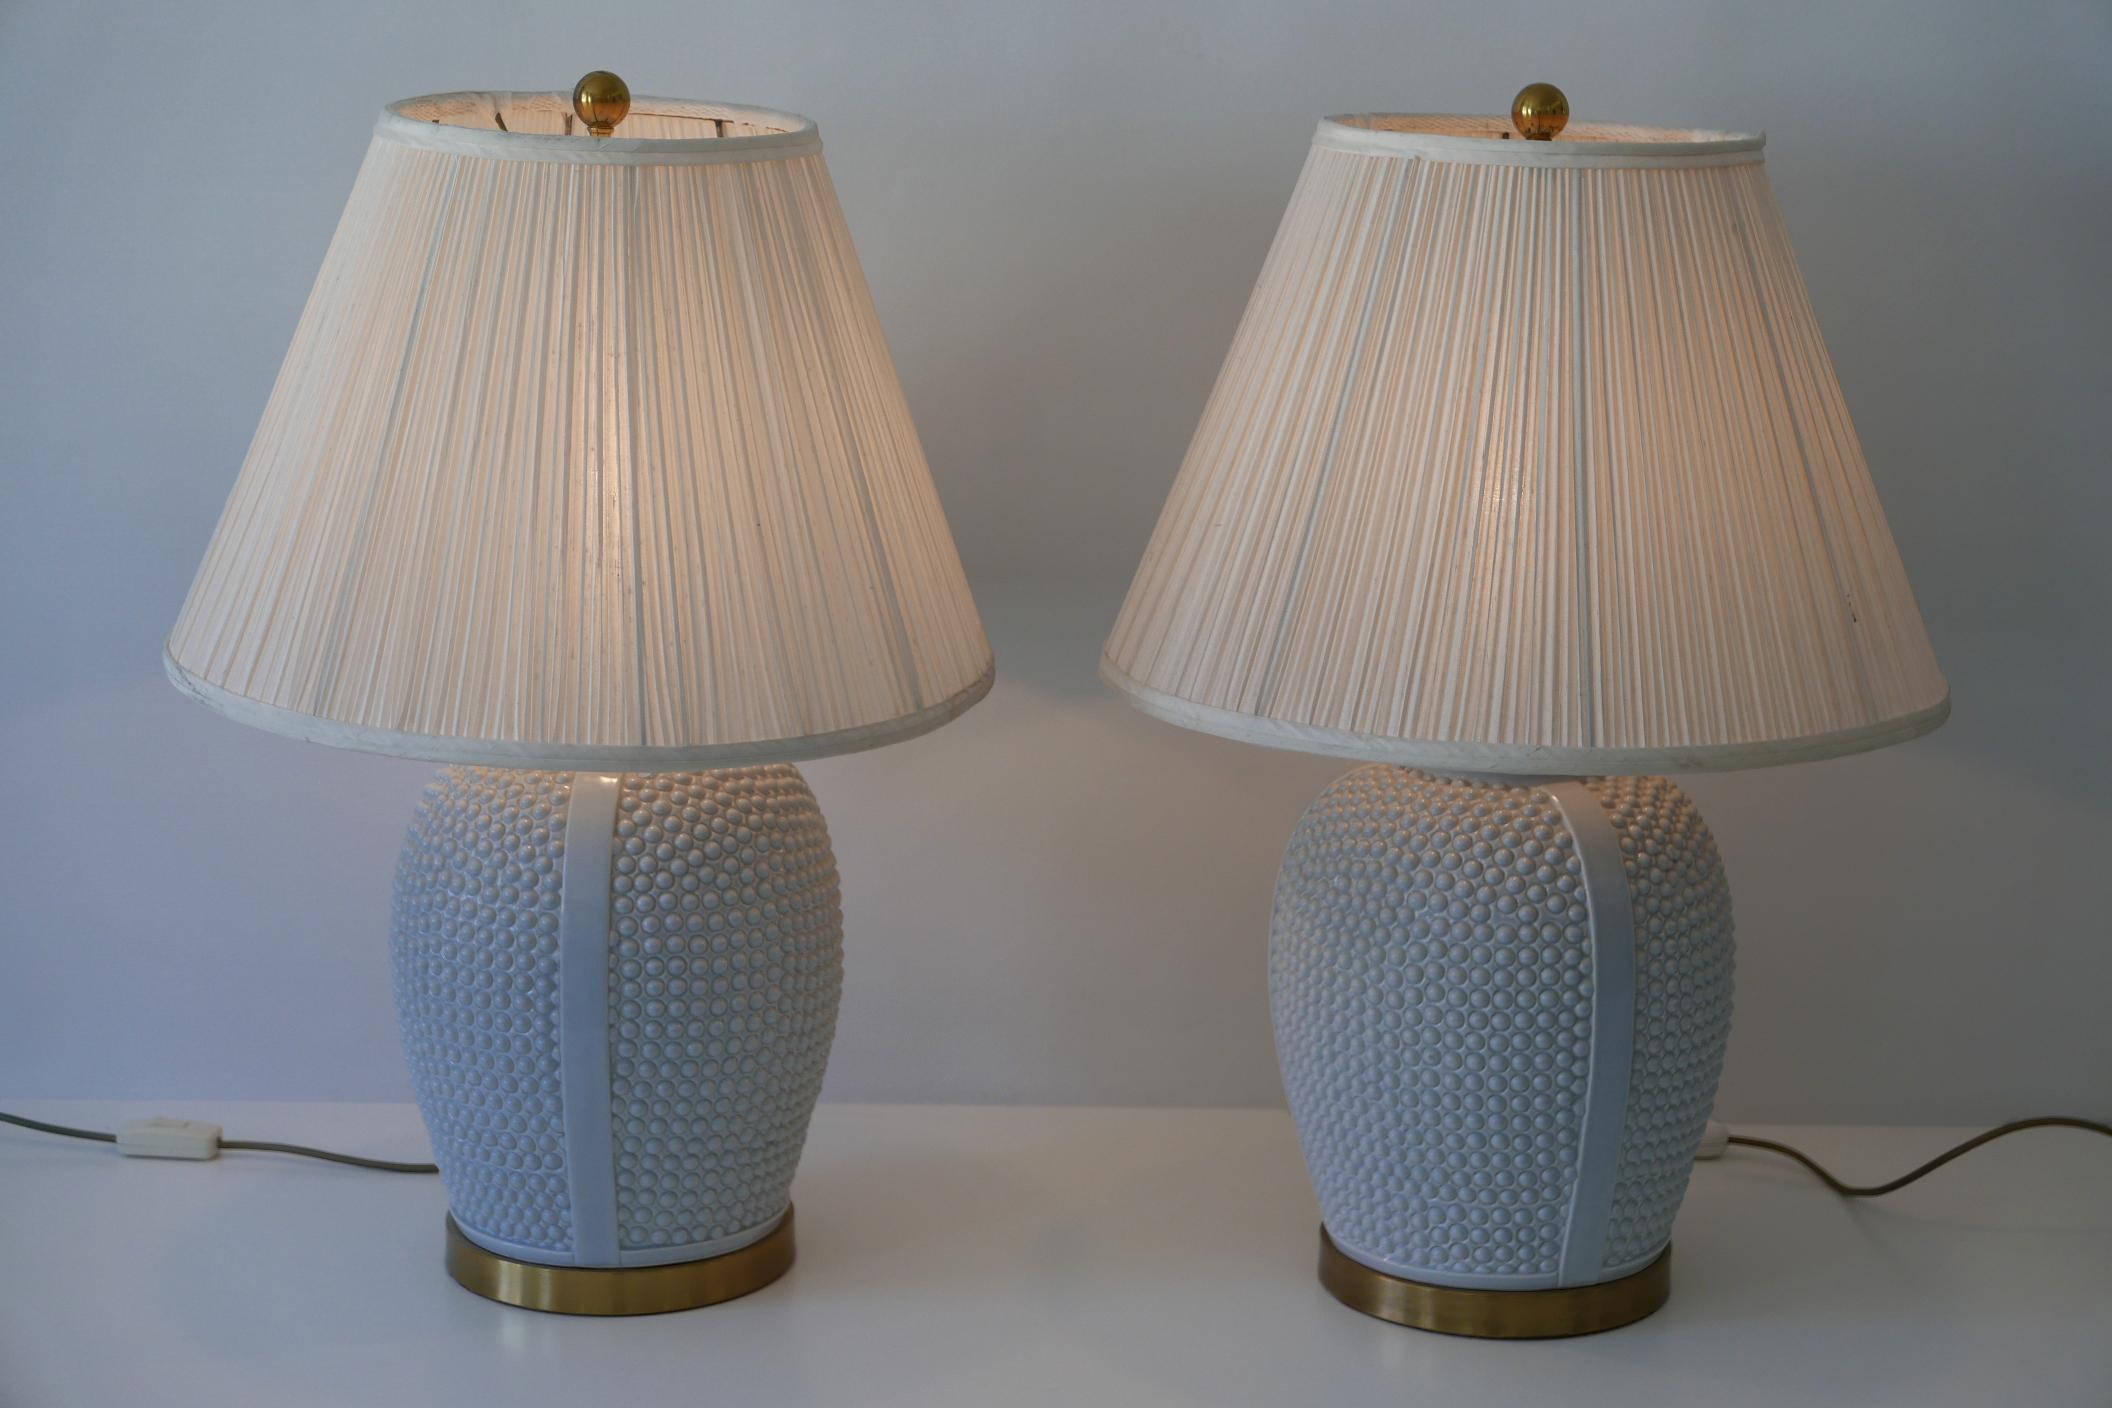 Glazed Set of Two Exceptional Mid-Century Modern Ceramic Table Lamps, 1960s, Germany For Sale